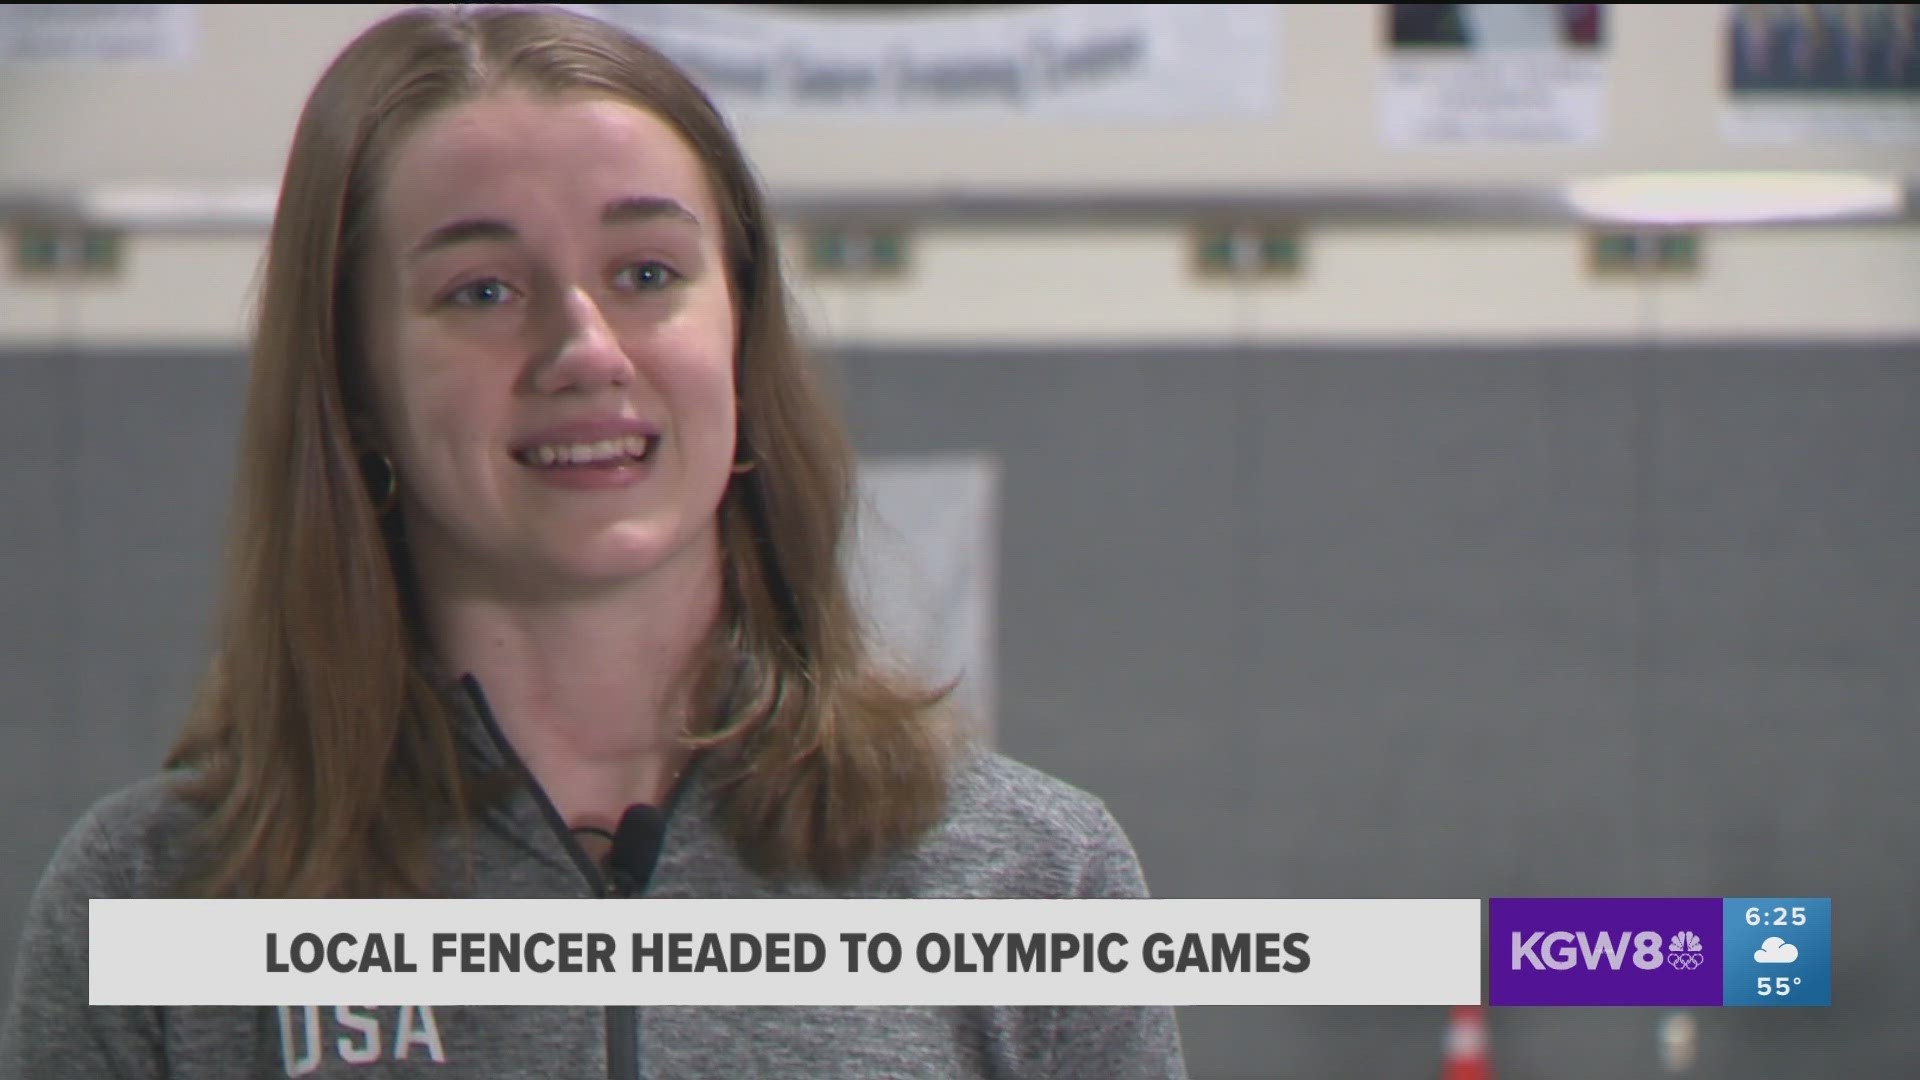 Magda Skarbonkiewicz, 18, will be headed to the Olympics in July as part of the Saber Team with the Oregon Fencing Alliance.